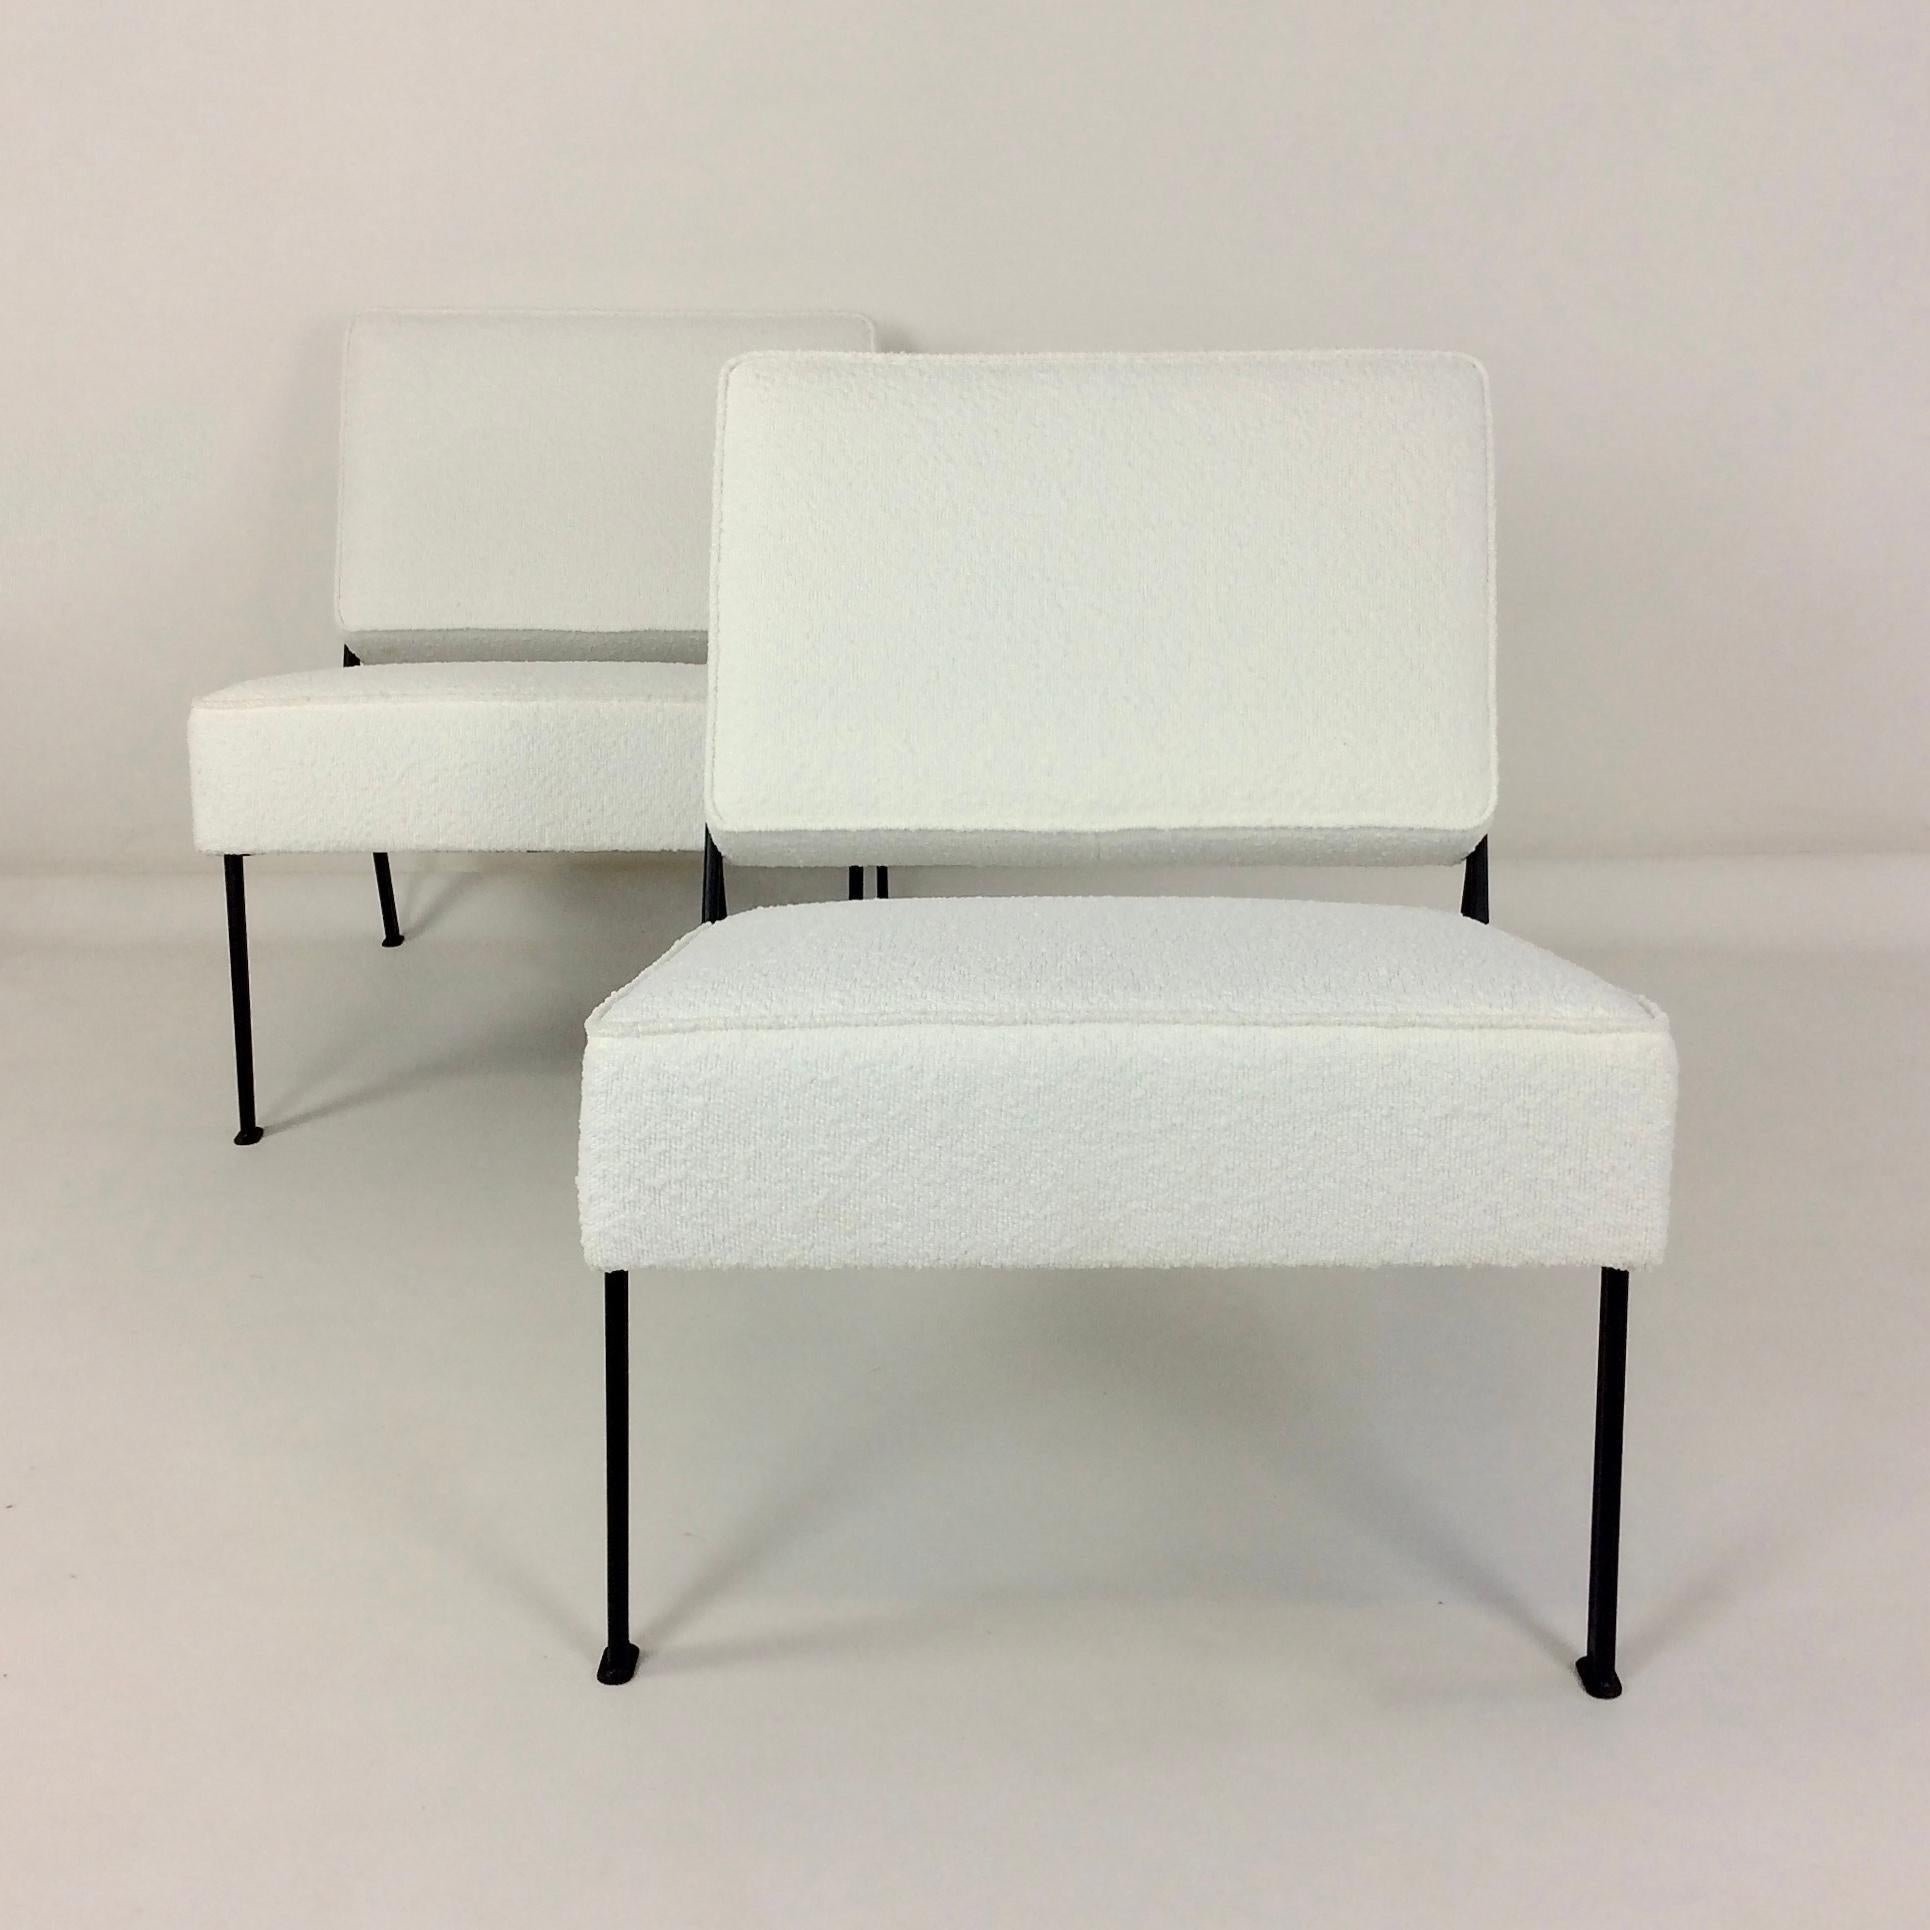 Mid-20th Century Pair of G2 Chairs By A.R.P. Guariche, Motte, Mortier for Airborne, 1953, France. For Sale